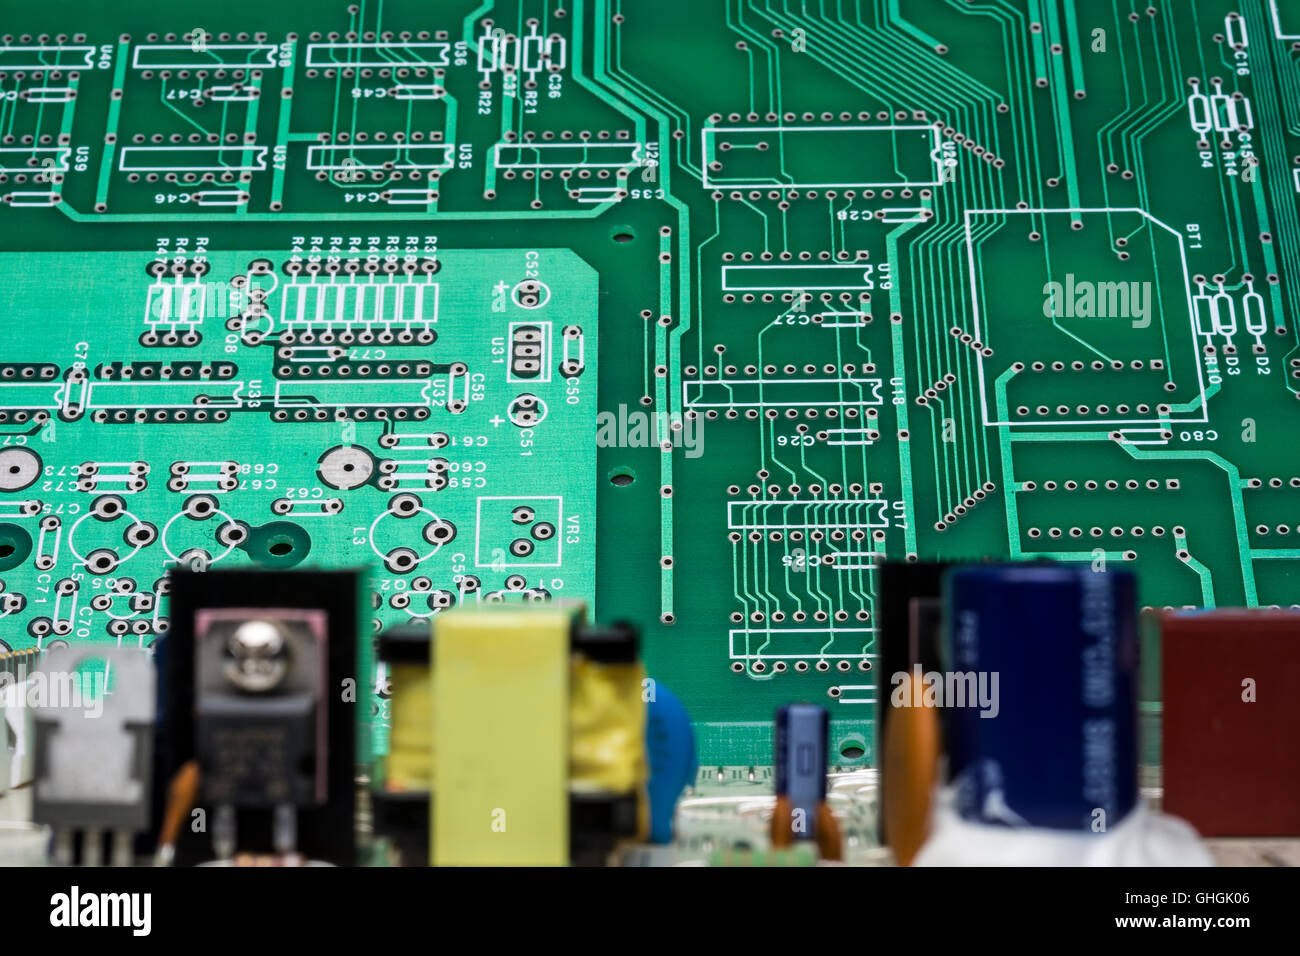 An out-of-focus circuit board with components has a two-tone green printed circuit behind it that is in focus. Stock Photo